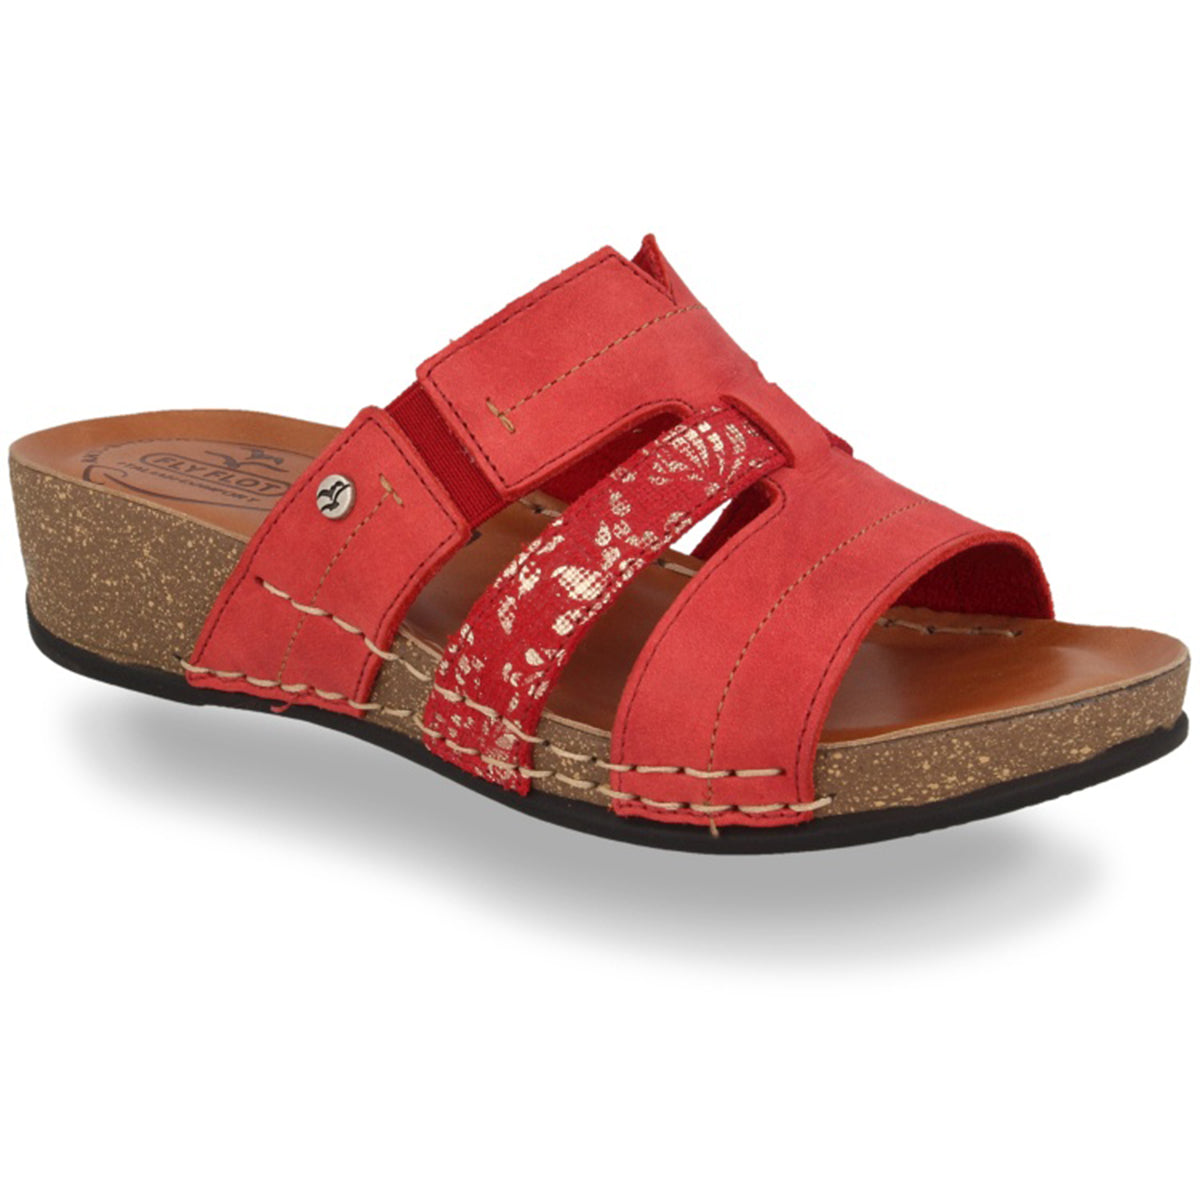 See the Red Leather Slide Women Sandals With Anti-Shock Cushioned Leather Insole in the colour RED, available in various sizes